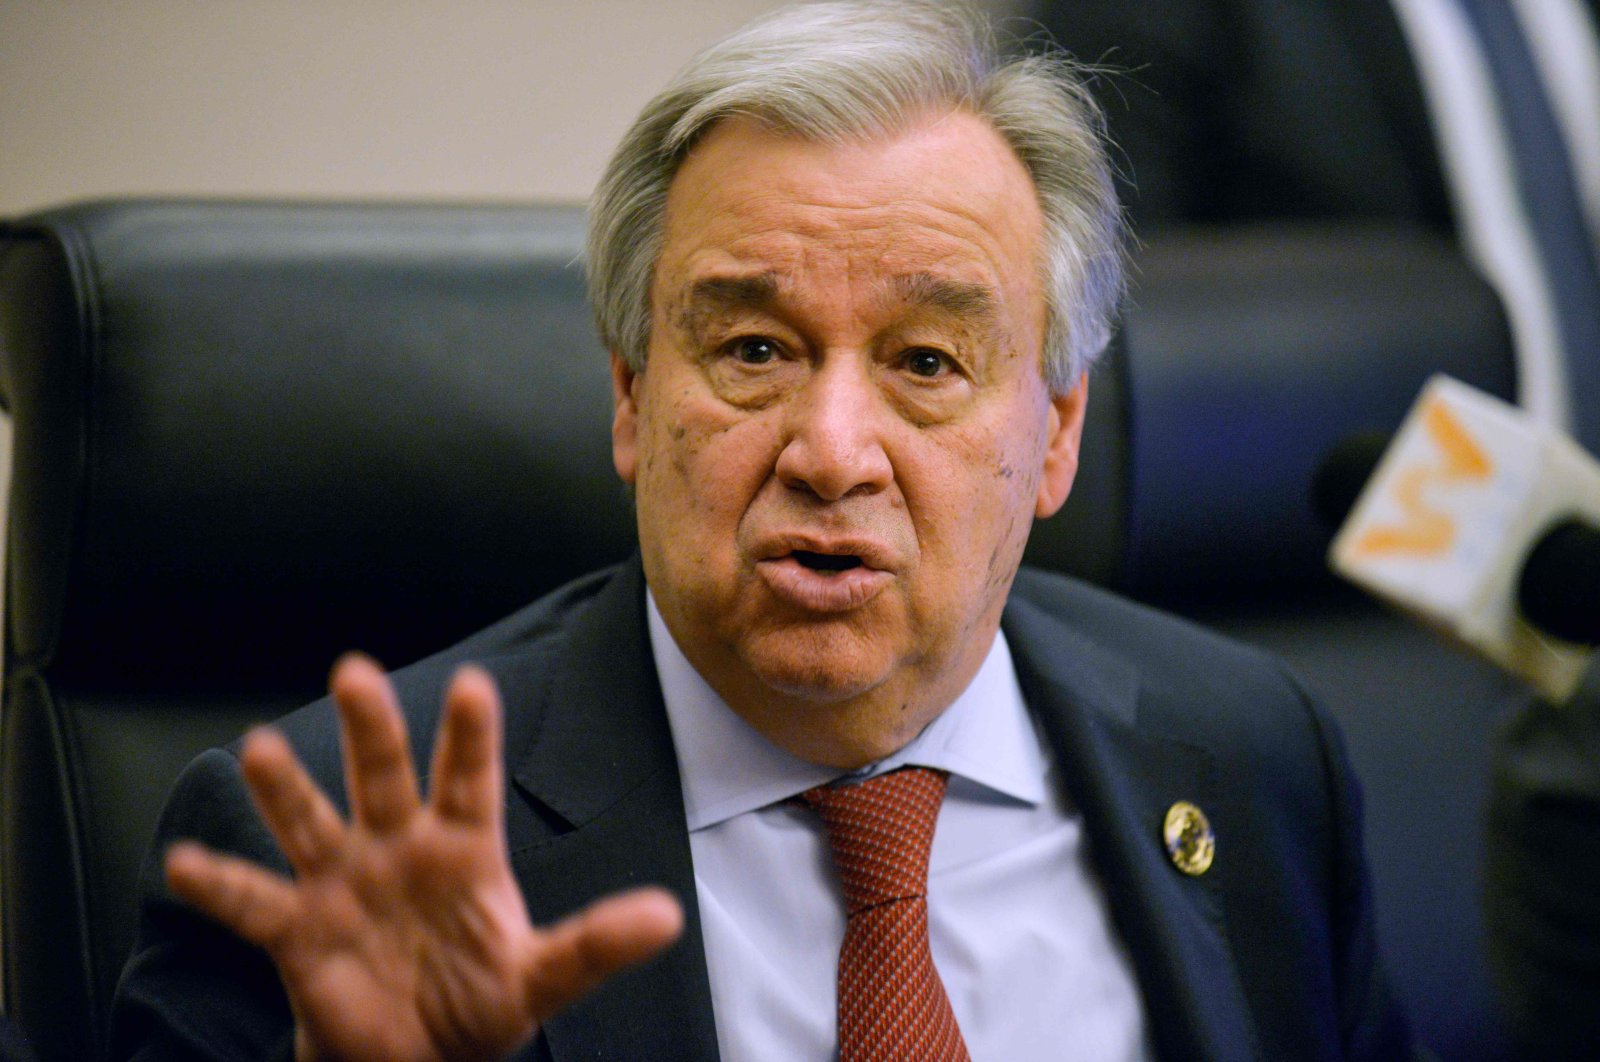 U.N. Secretary-General Antonio Guterres speaks during a news conference at the African Union headquarters during the 33rd African Union (AU) Summit, Addis Ababa, Ethiopia, Feb. 8, 2020. (AFP Photo)